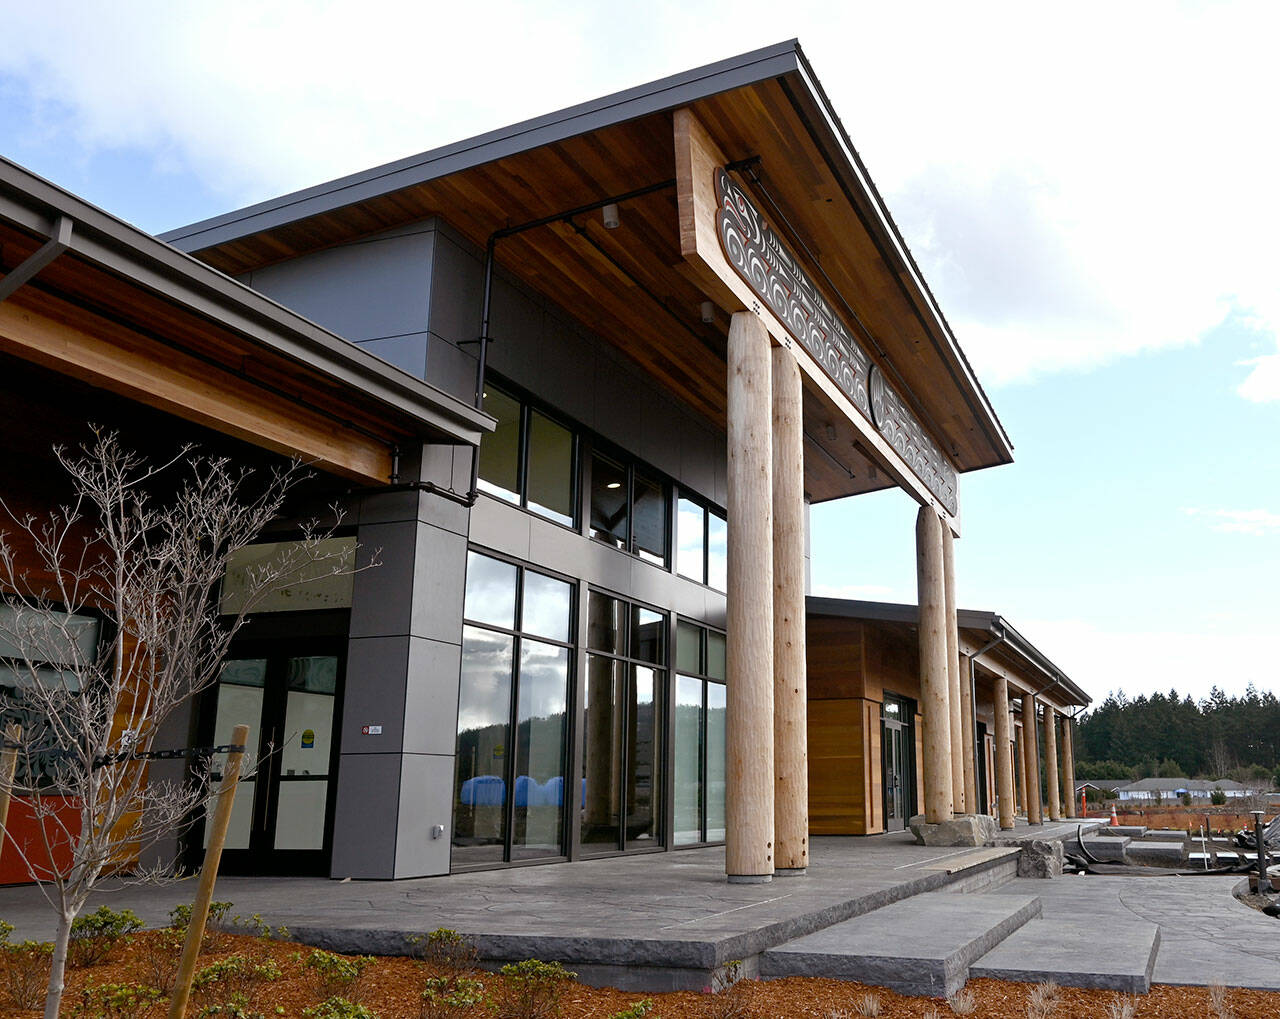 The Jamestown S’Klallam Tribe’s Healing Clinic is scheduled to open later this month, a 16,806-square-foot facility offering patients with opioid-use disorder (OUD) treatment with daily doses of methadone and Suboxone, along with wraparound services such as dental care, counseling and more. (Michael Dashiell/Olympic Peninsula News Group)